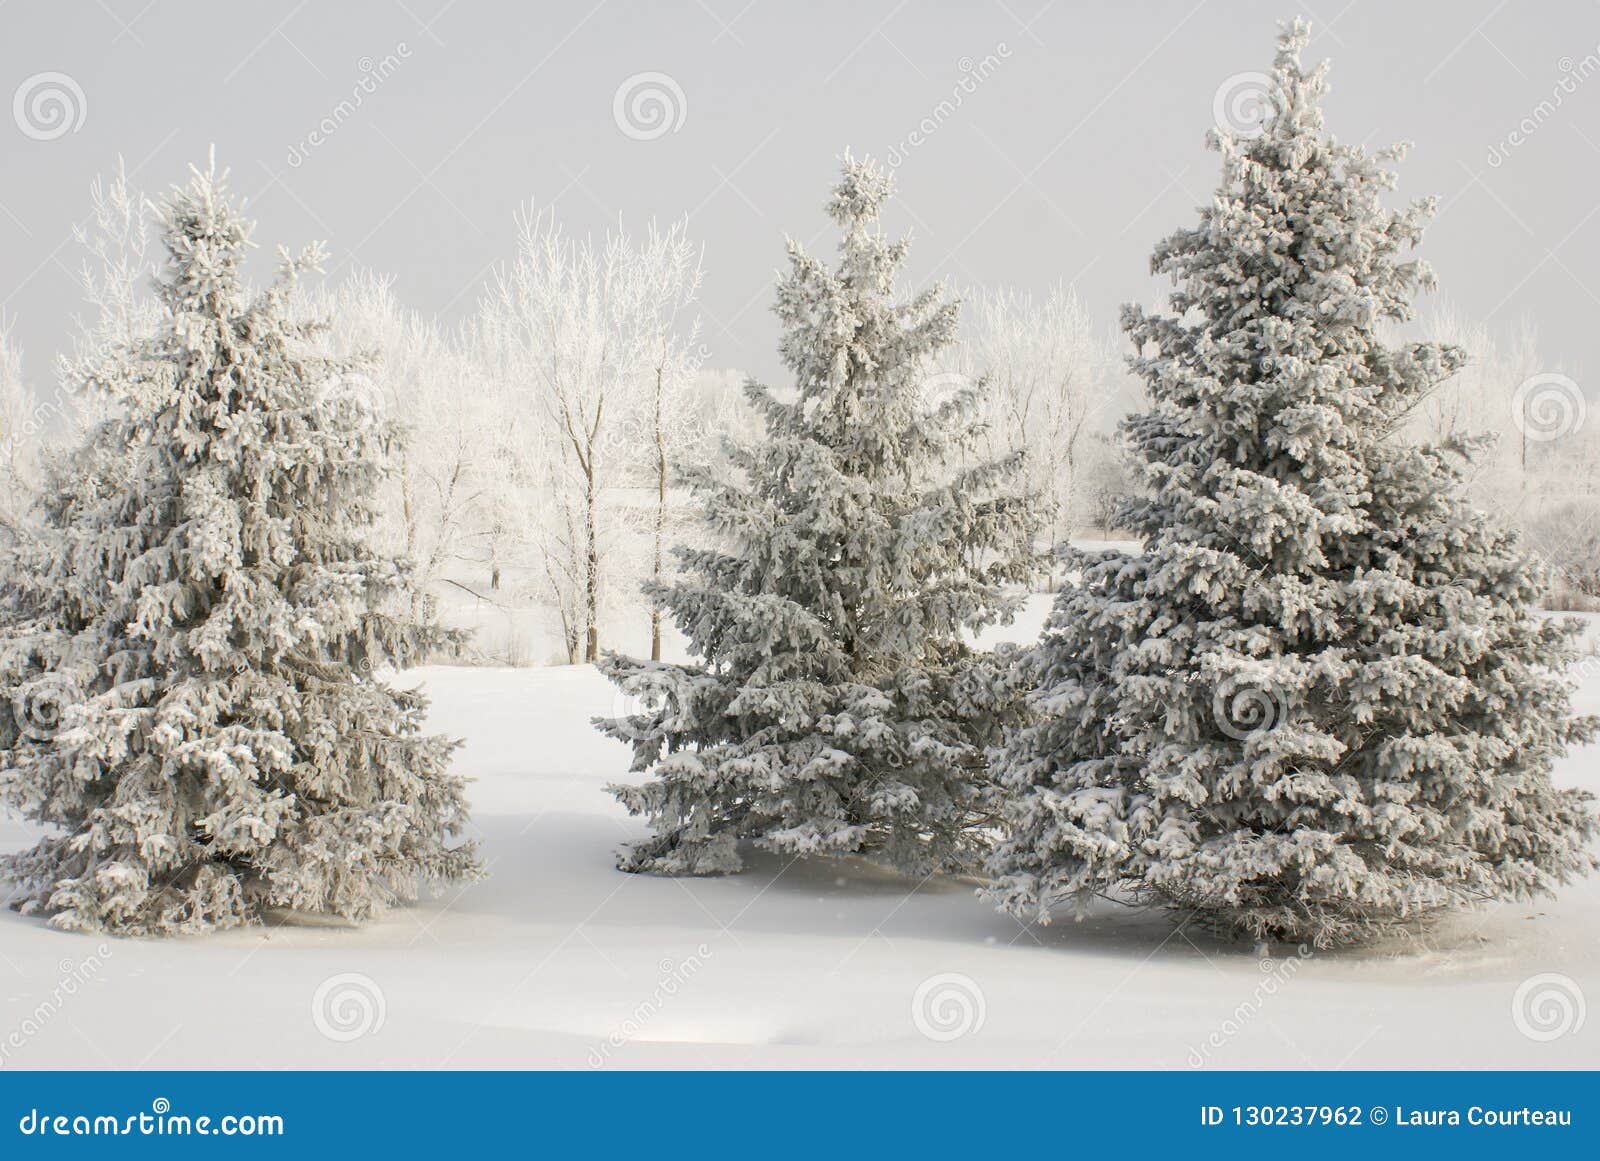 group of snow covered evergreens with white covered trees in background and snow ground cover in winter